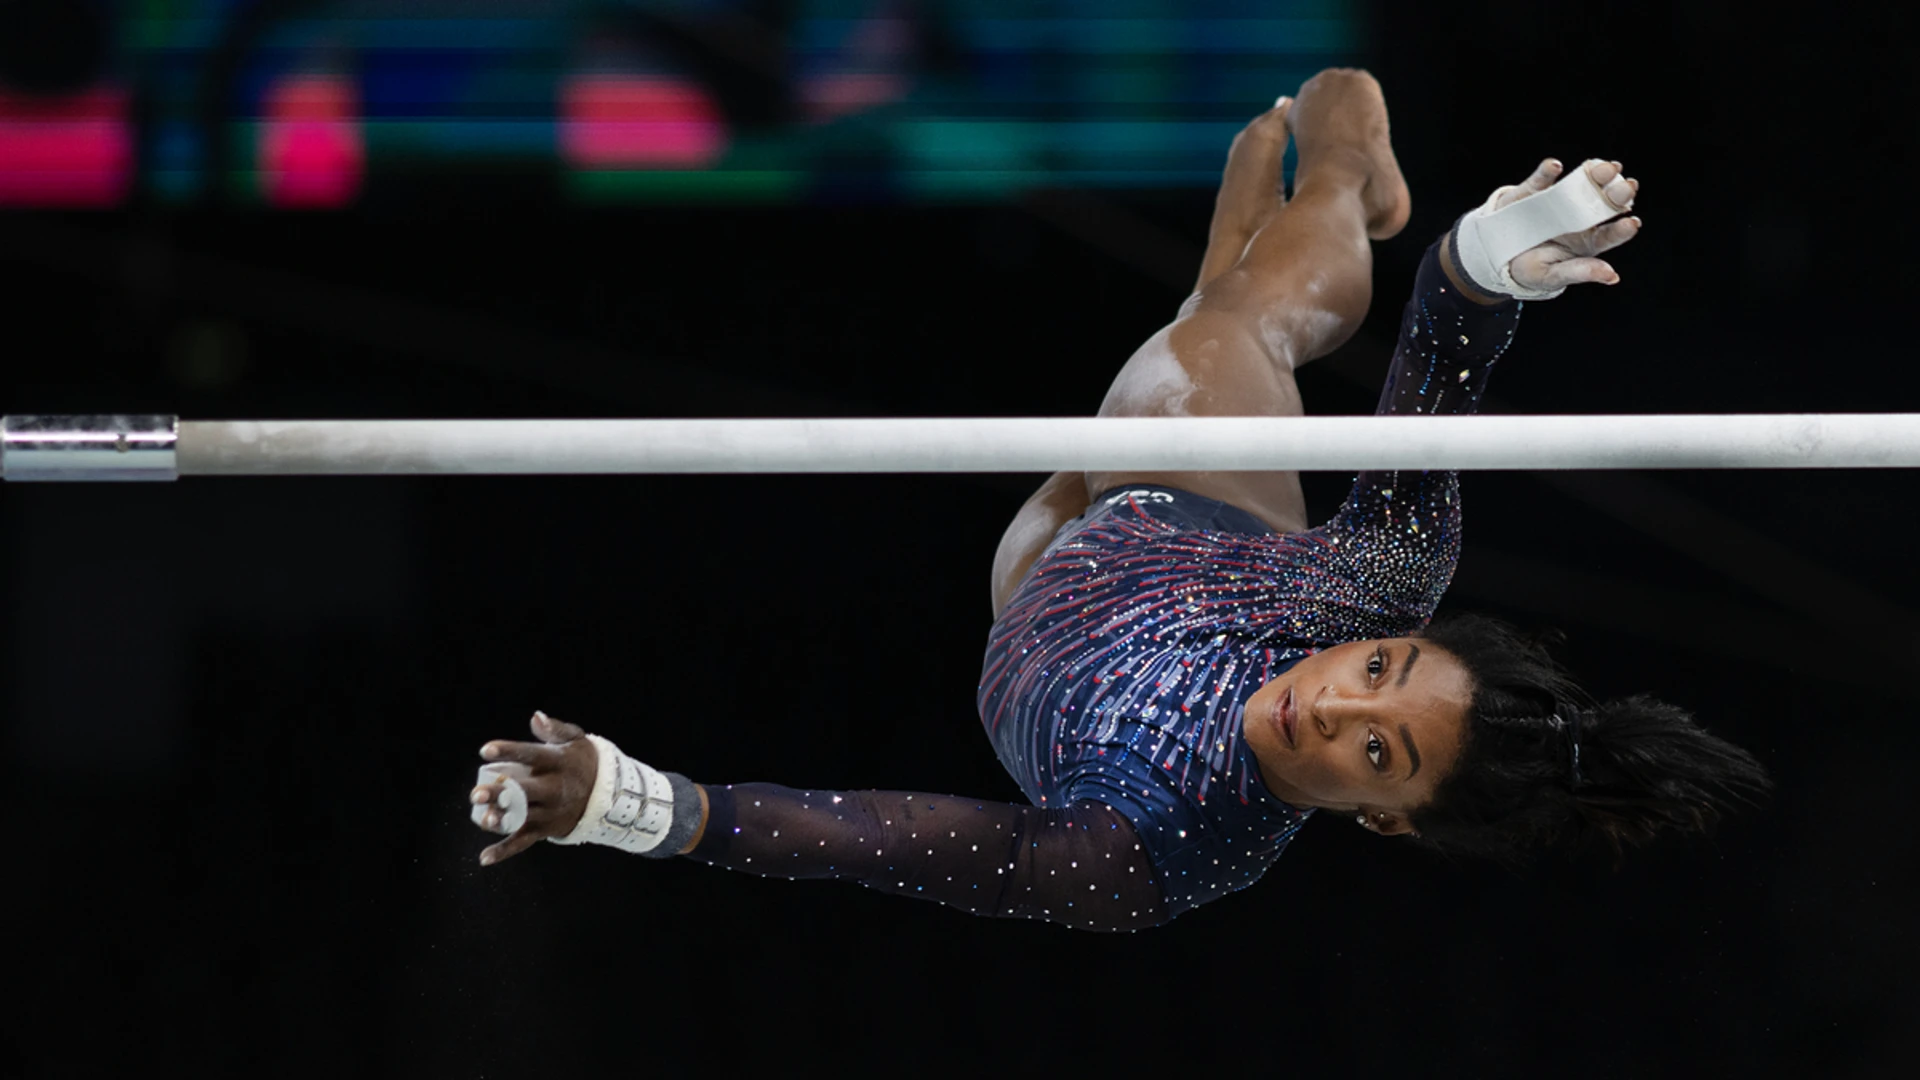 ICONIC: Biles ready to unveil unique uneven bars skill at Paris Olympics